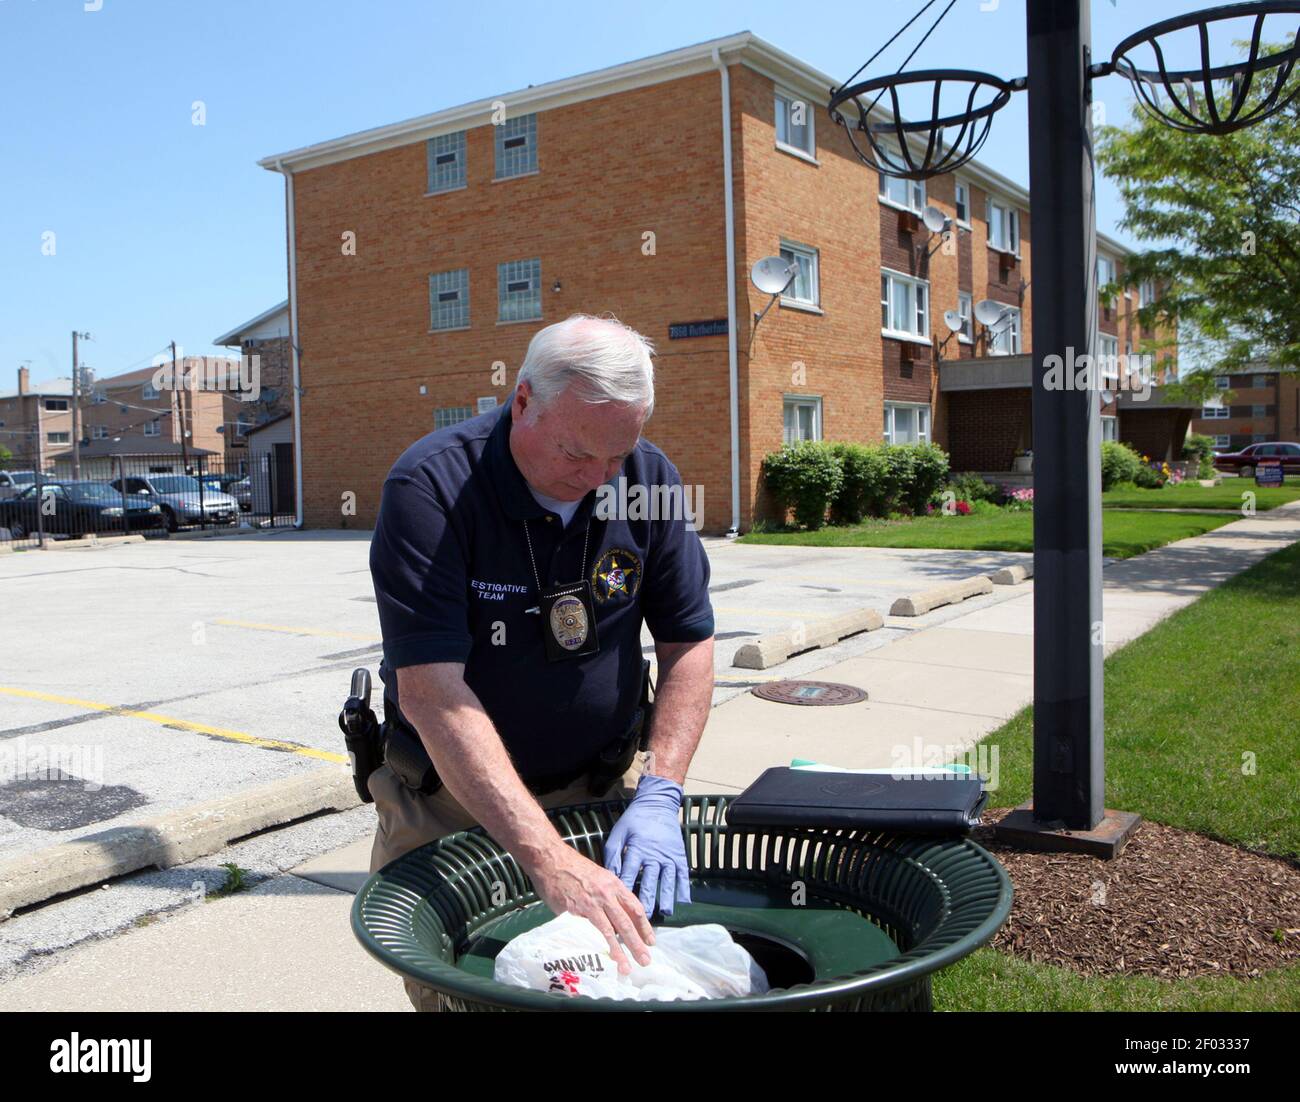 South Suburban Major Crimes Task Force investigators survey the area,  including looking into trashcans, around the apartment building where Estrella  Carrera was found stabbed to death, Monday, May 14, 2012 in Burbank,